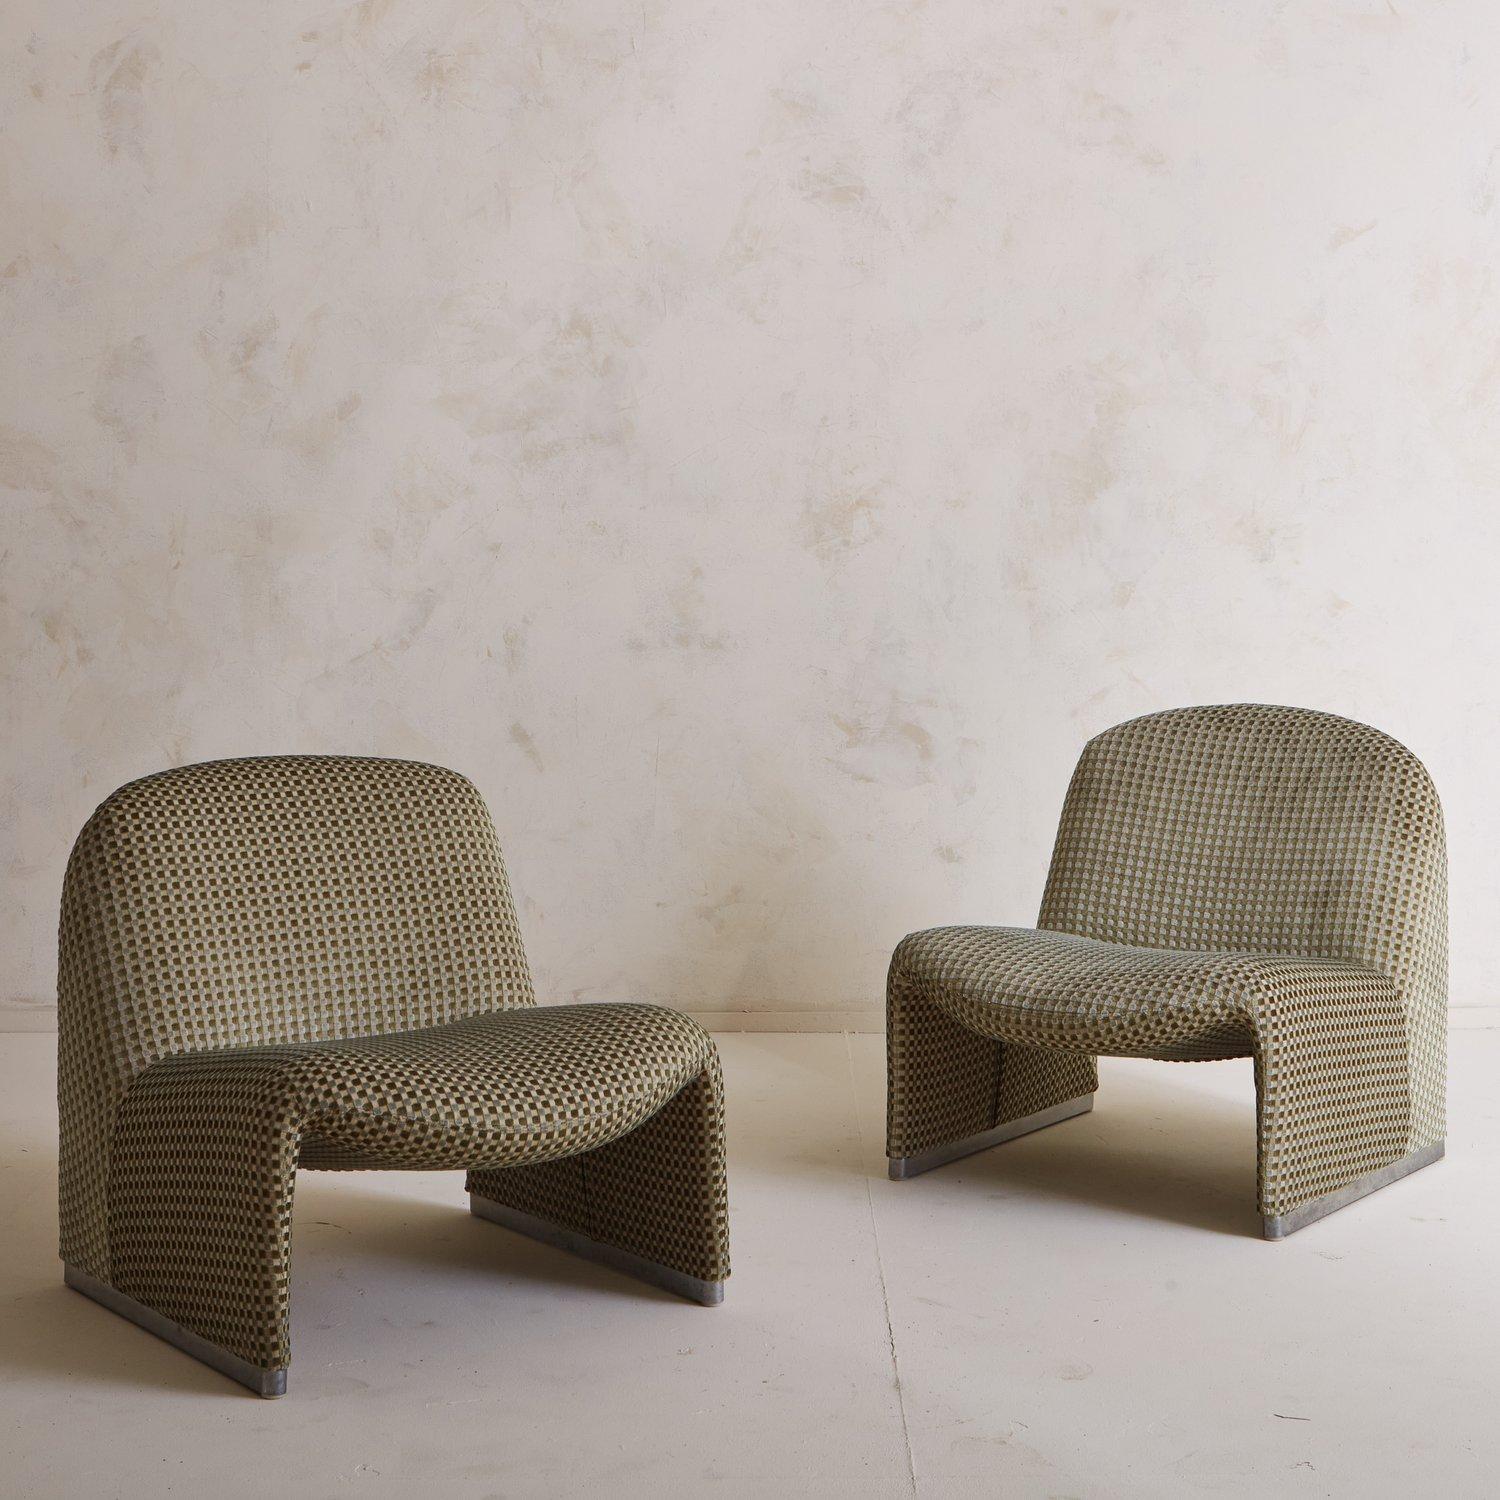 The Alky chair was designed by Giancarlo Piretti for Castelli in 1969. Sculptural, fantastic modern design - the Alky chair was exhibited with the Piretti Collection at NeoCon in 1988. This chair looks amazing from every angle and floats beautifully